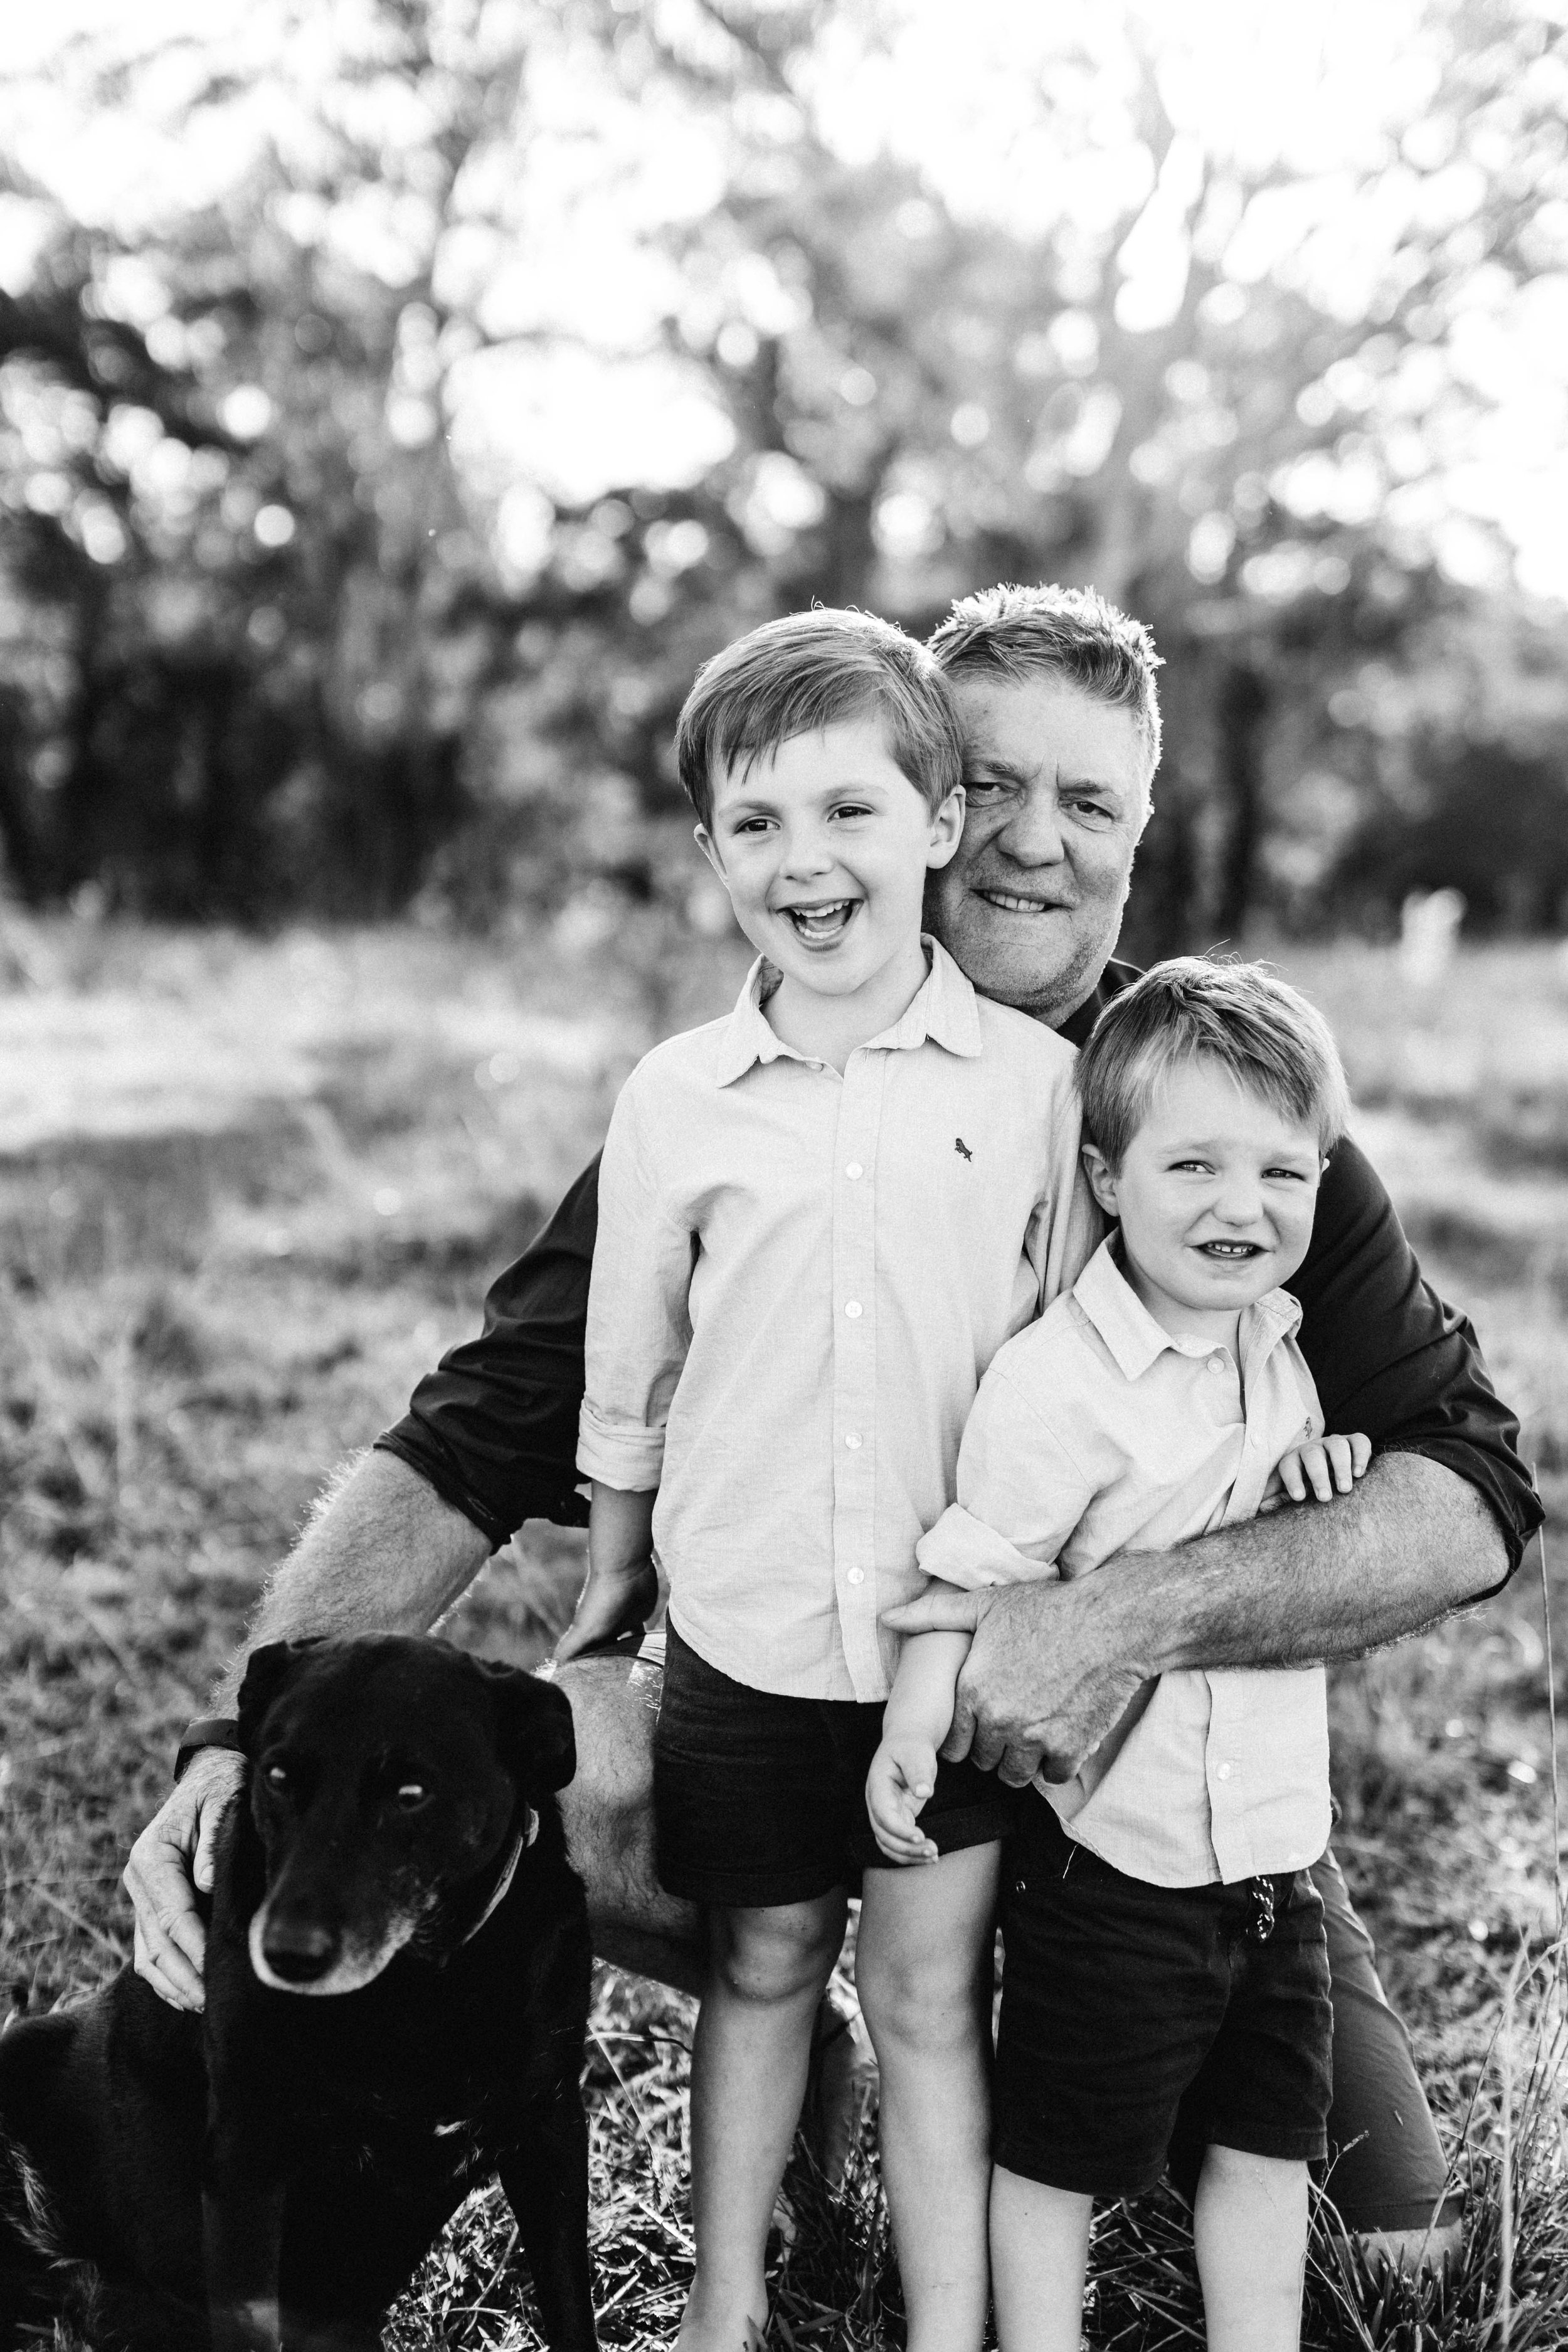 durney-family-exeter-southern-highlands-bowral-inhome-family-lifestyle-wollondilly-camden-macarthur-sydney-photography-www.emilyobrienphotography.net-37.jpg